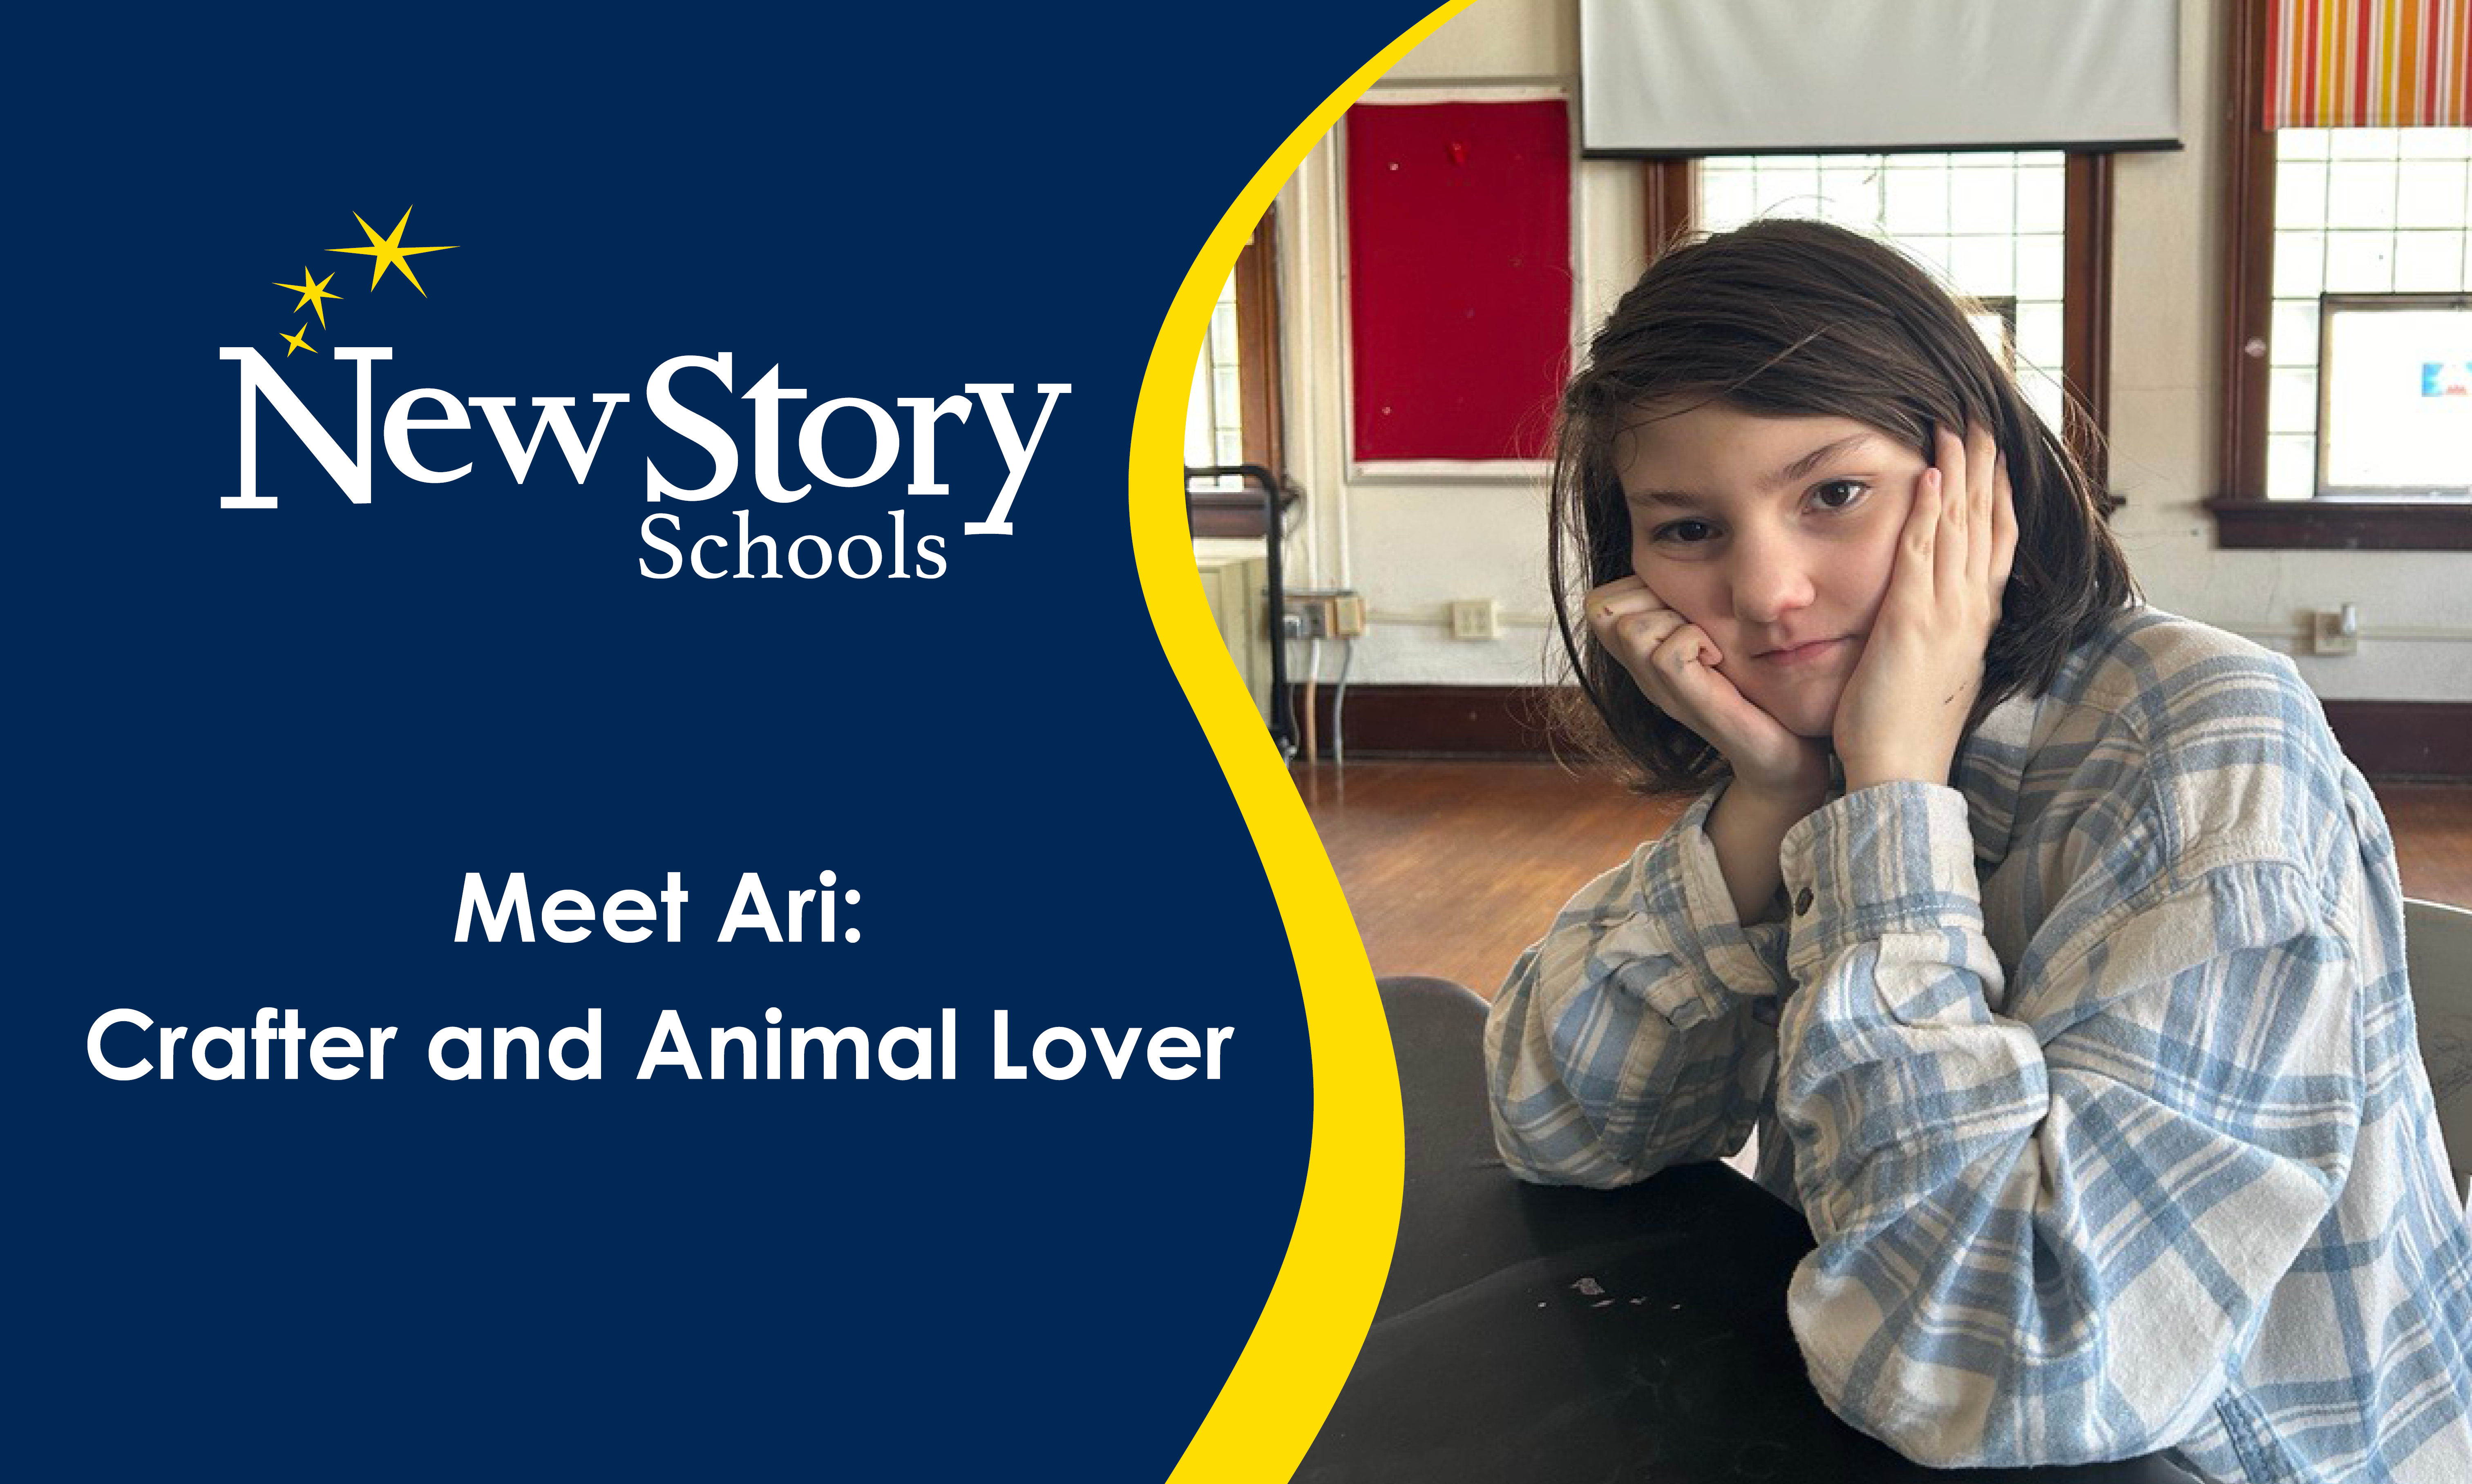 Meet Ari: Crafter and Animal Lover